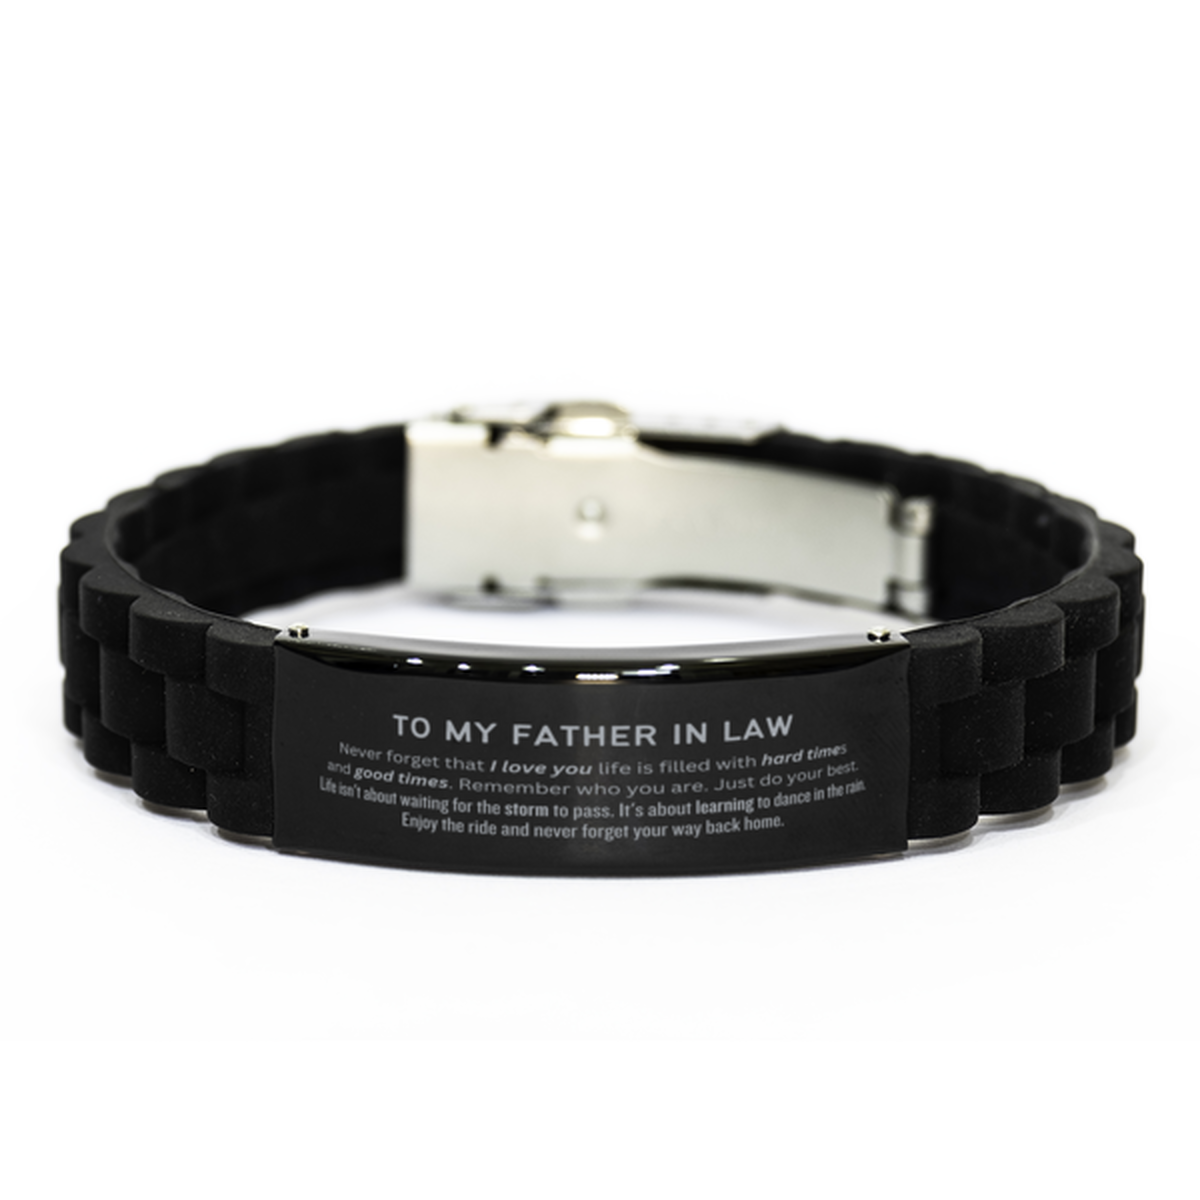 Christmas Father In Law Black Glidelock Clasp Bracelet Gifts, To My Father In Law Birthday Thank You Gifts For Father In Law, Graduation Unique Gifts For Father In Law To My Father In Law Never forget that I love you life is filled with hard times and goo